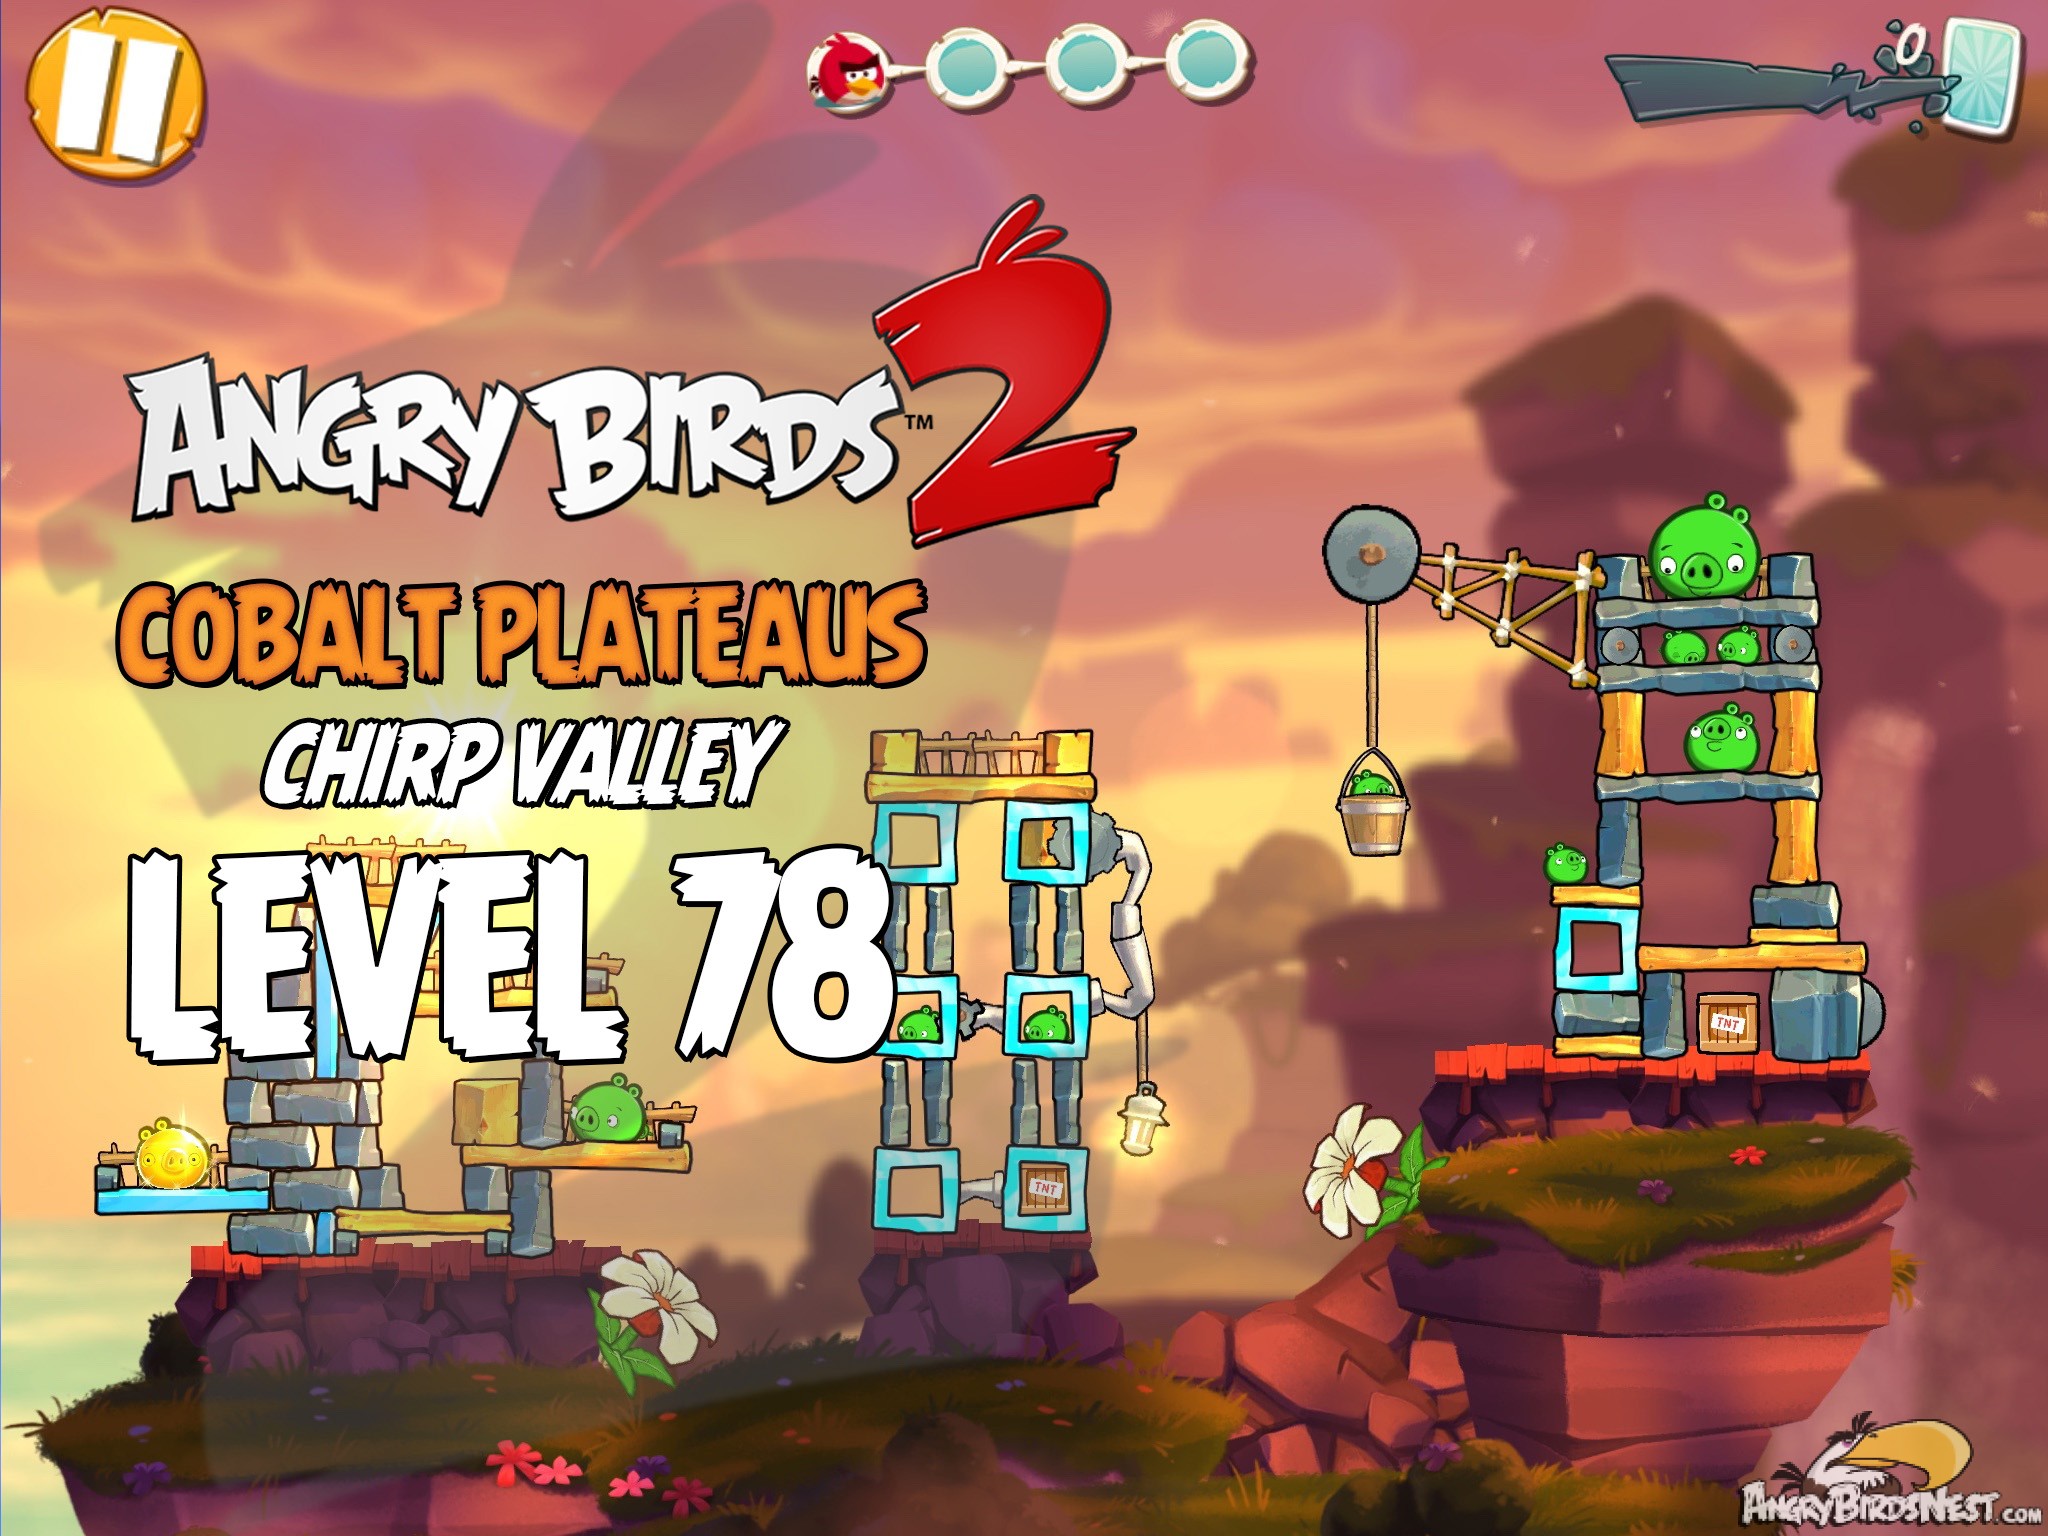 Angry Birds 2 Cobalt Plateaus Chirp Valley Level 78